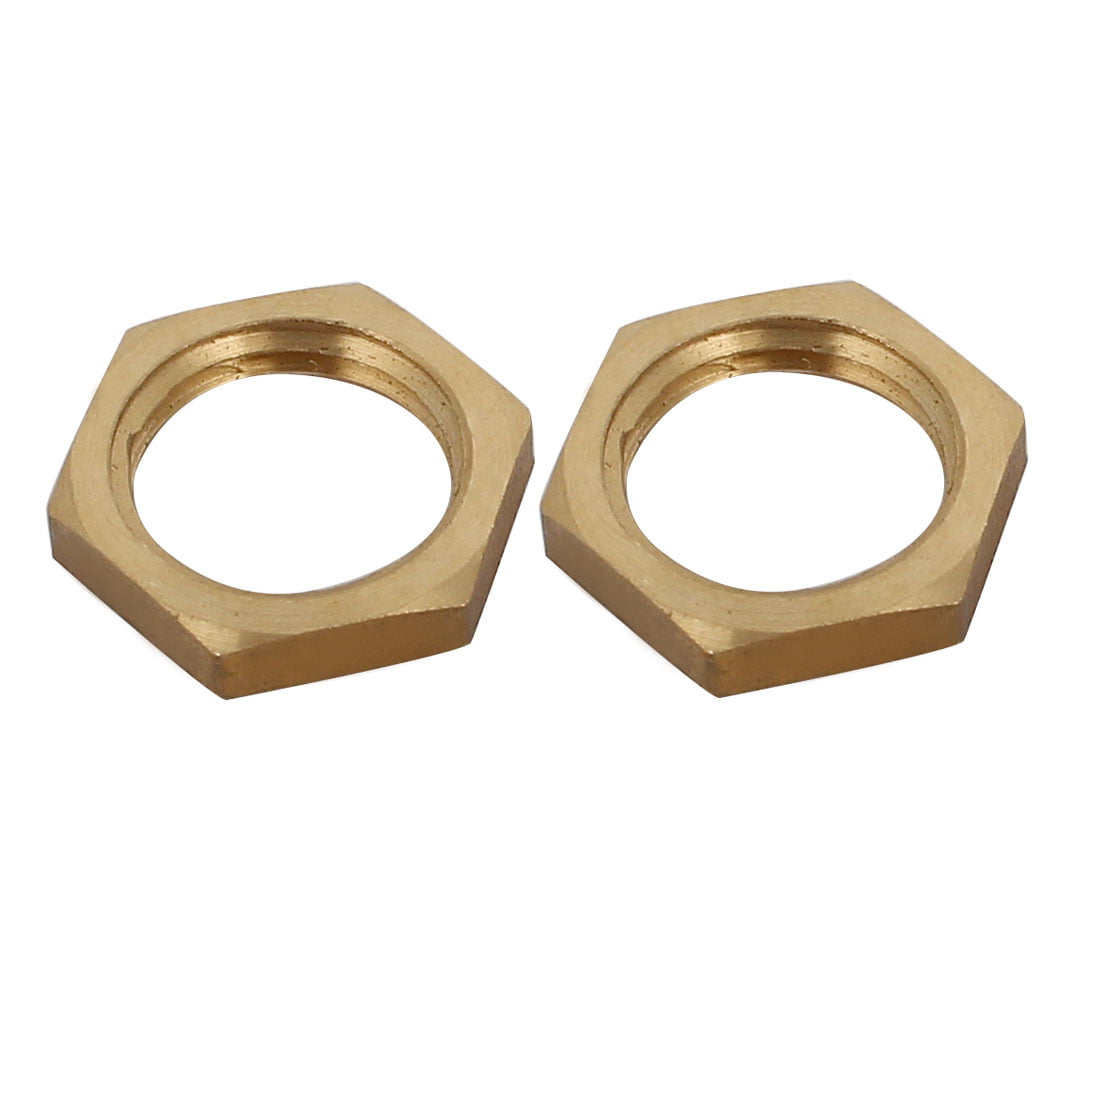 10Pcs 1/2" Female Thread Brass Pipe Fitting Flange Hex Lock Nut for Plumbing 